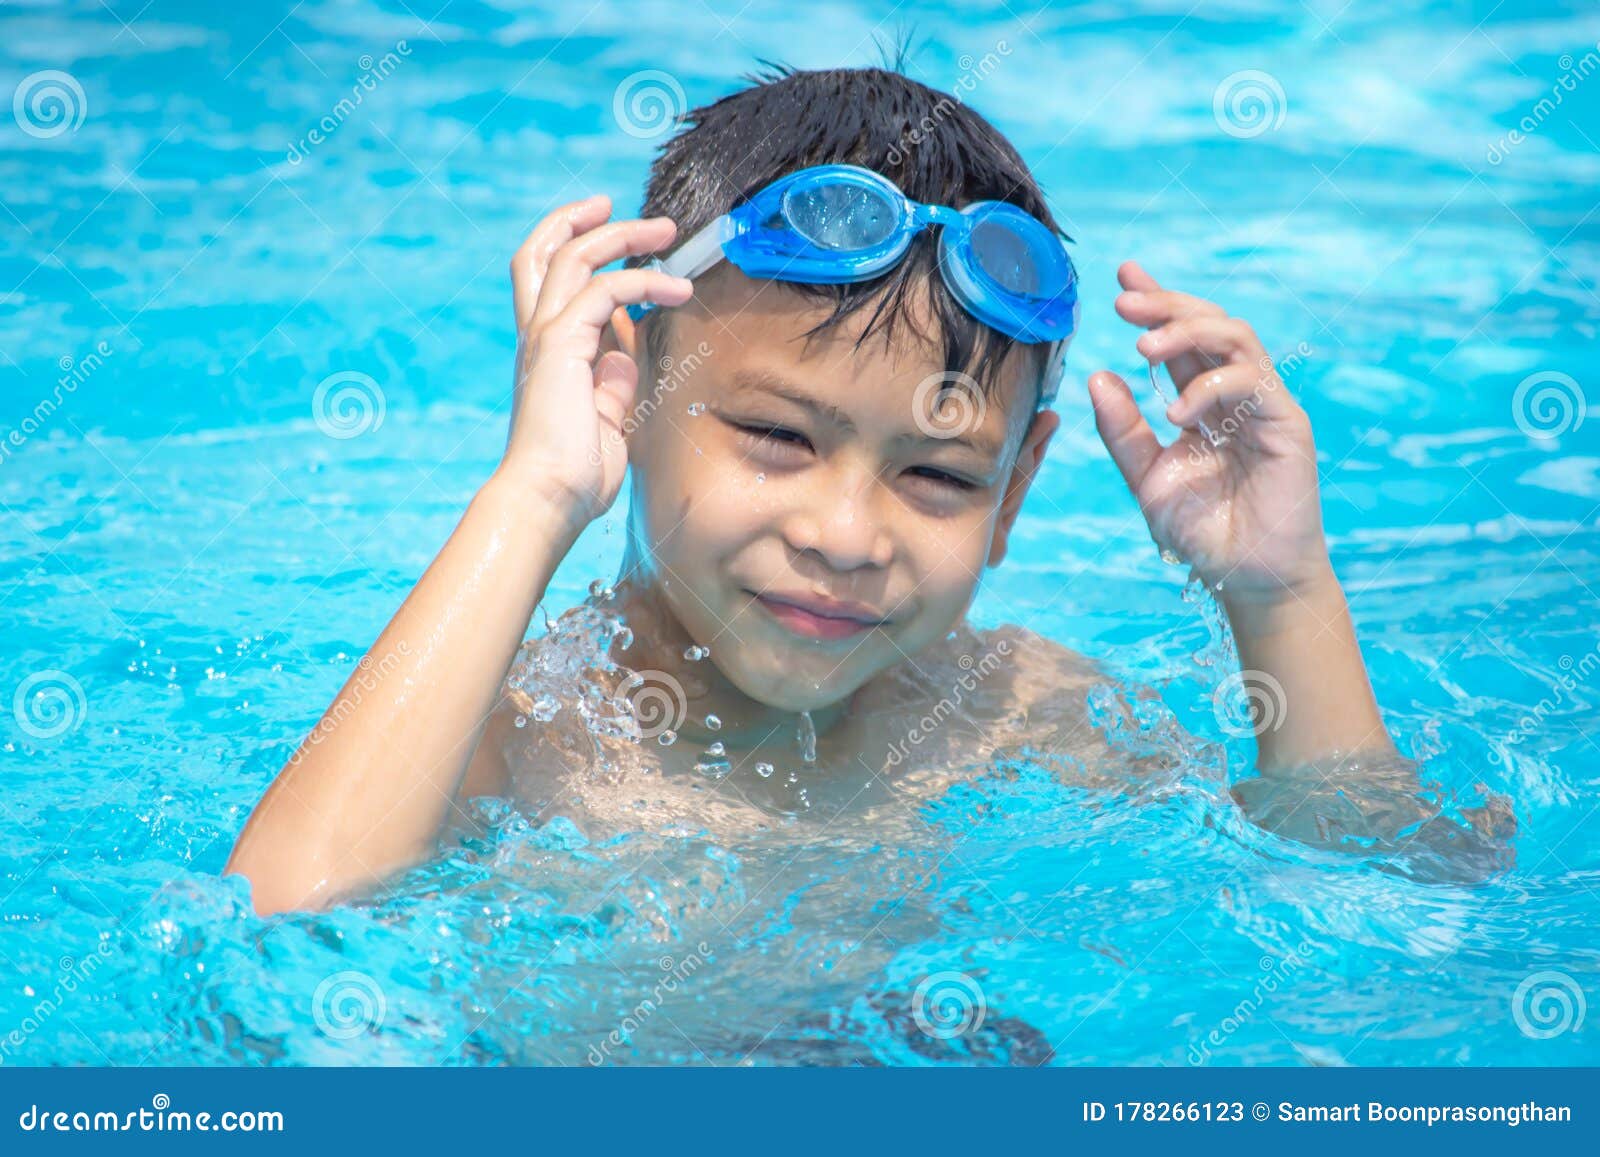 Portrait of smiling shirtless boy with swimming goggles in 